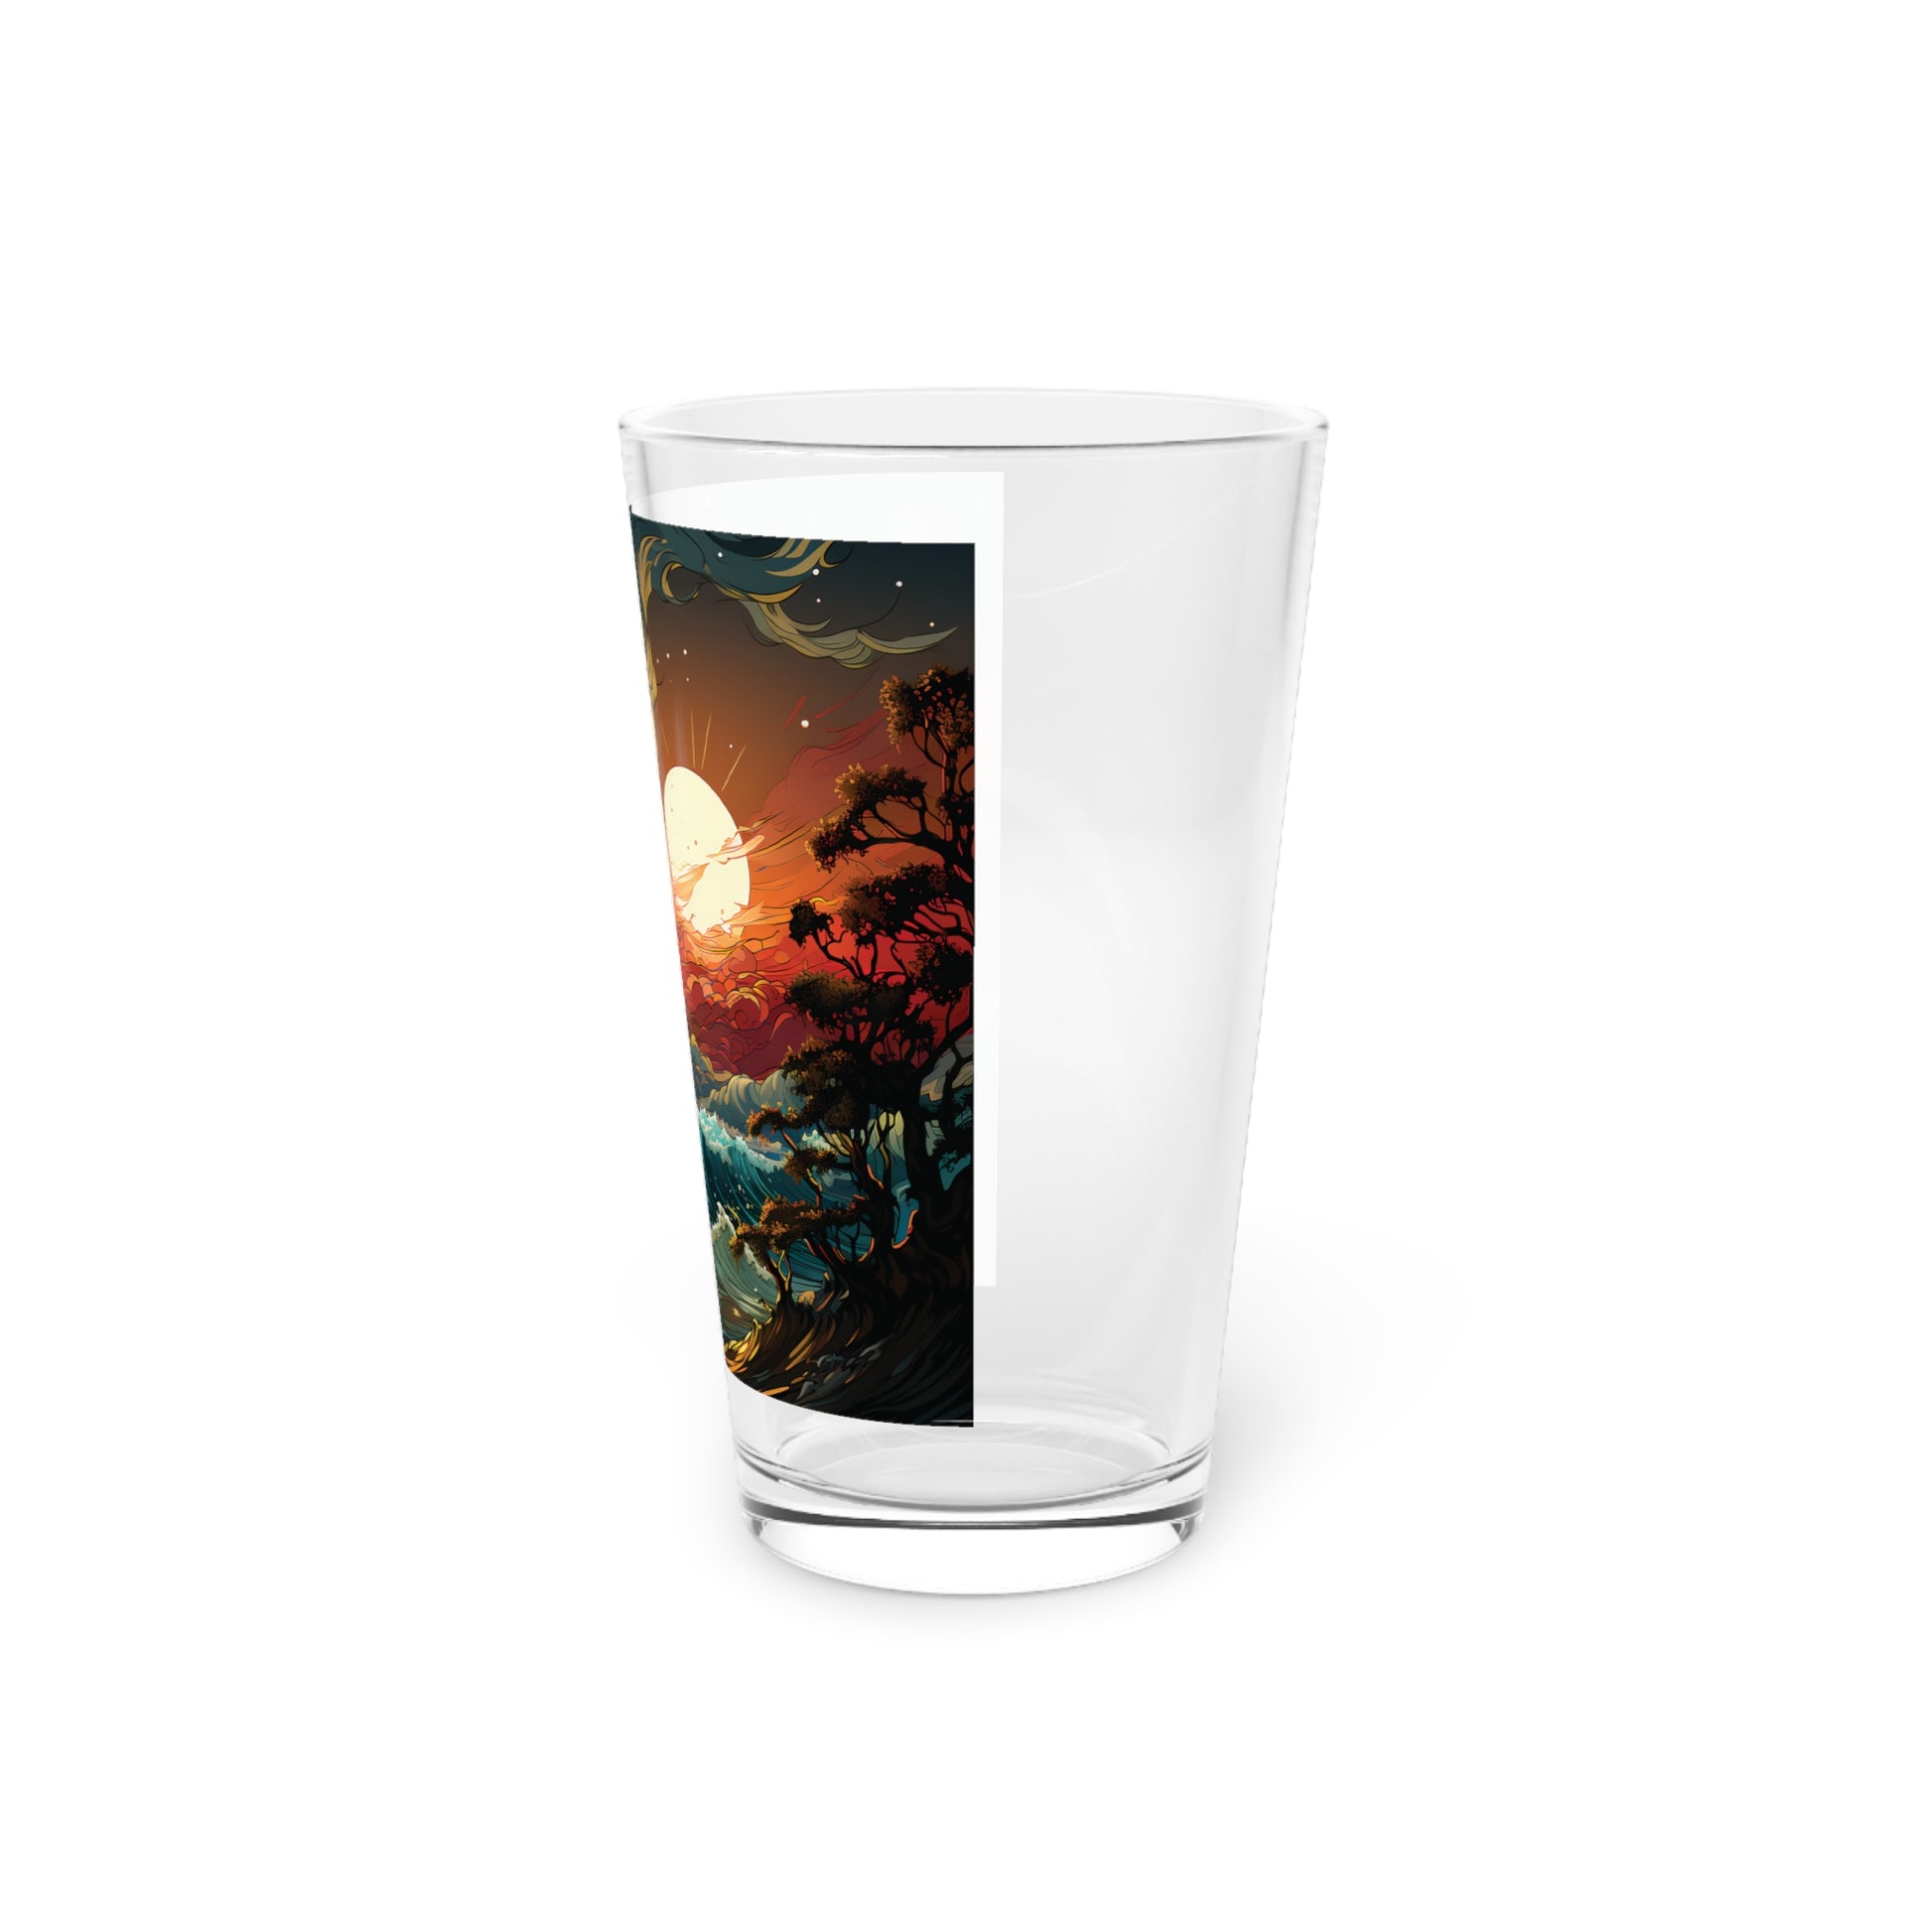 Enchant your drinking experience with our Tarot Card Style Ocean Waves Pint Glass (16oz) - Waves Design #030. Crafted by Stashbox.ai, this glass showcases tarot mysticism with ocean waves and a sailing ship. Embrace the mystic with this captivating glassware.